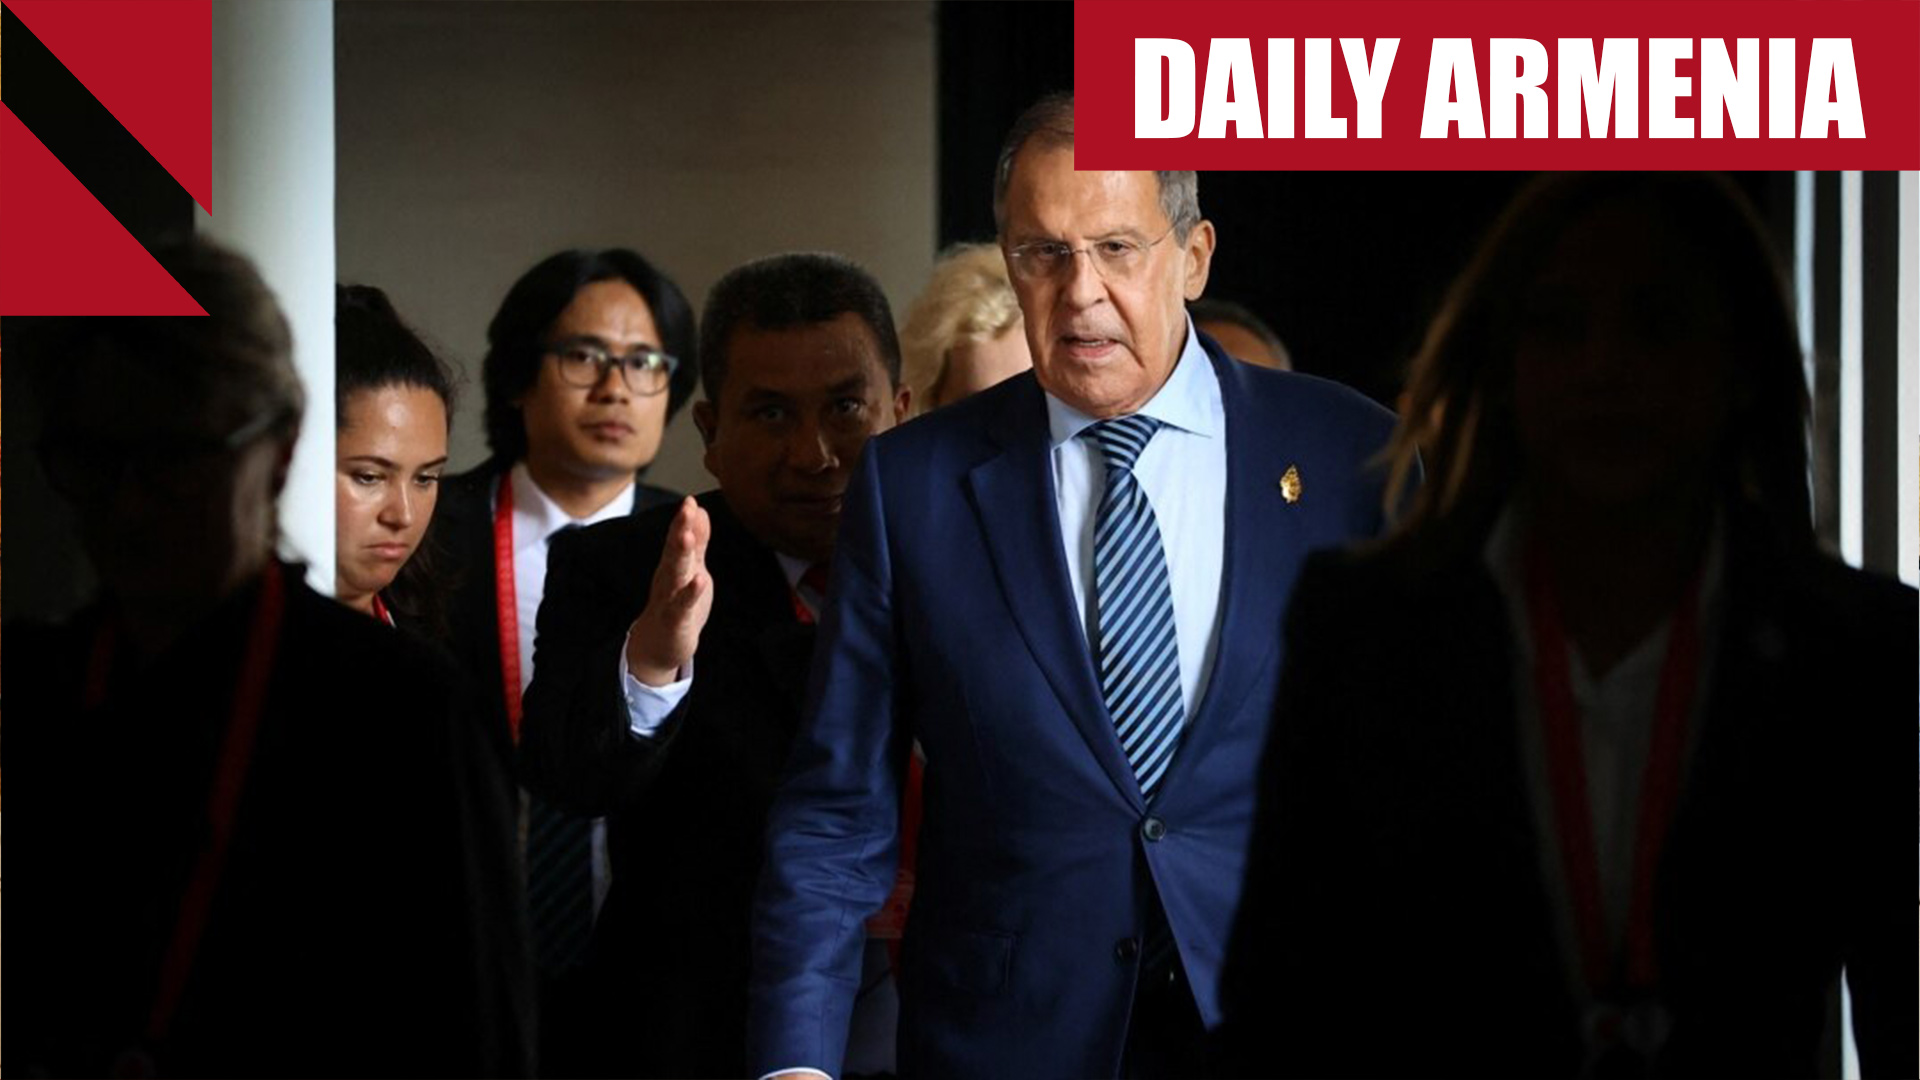 Russia’s-Lavrov-dismisses-Armenia’s-tilt-to-the-West,-believes-issues-will-be-resolved